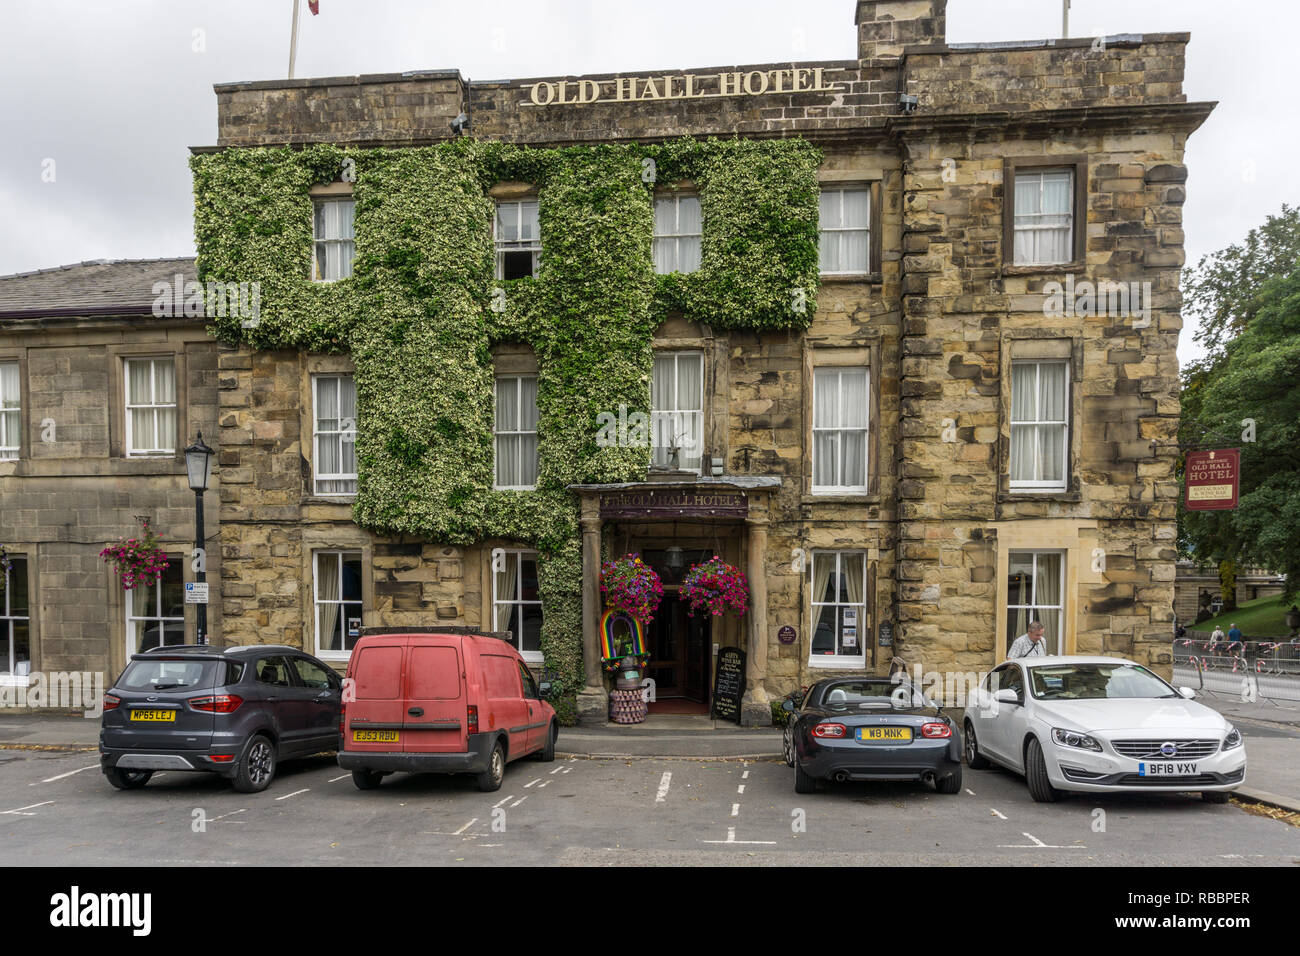 The frontage of the 16th century Old Hall Hotel, famed for being one of England's oldest hotels; Buxton, Derbyshire, UK Stock Photo